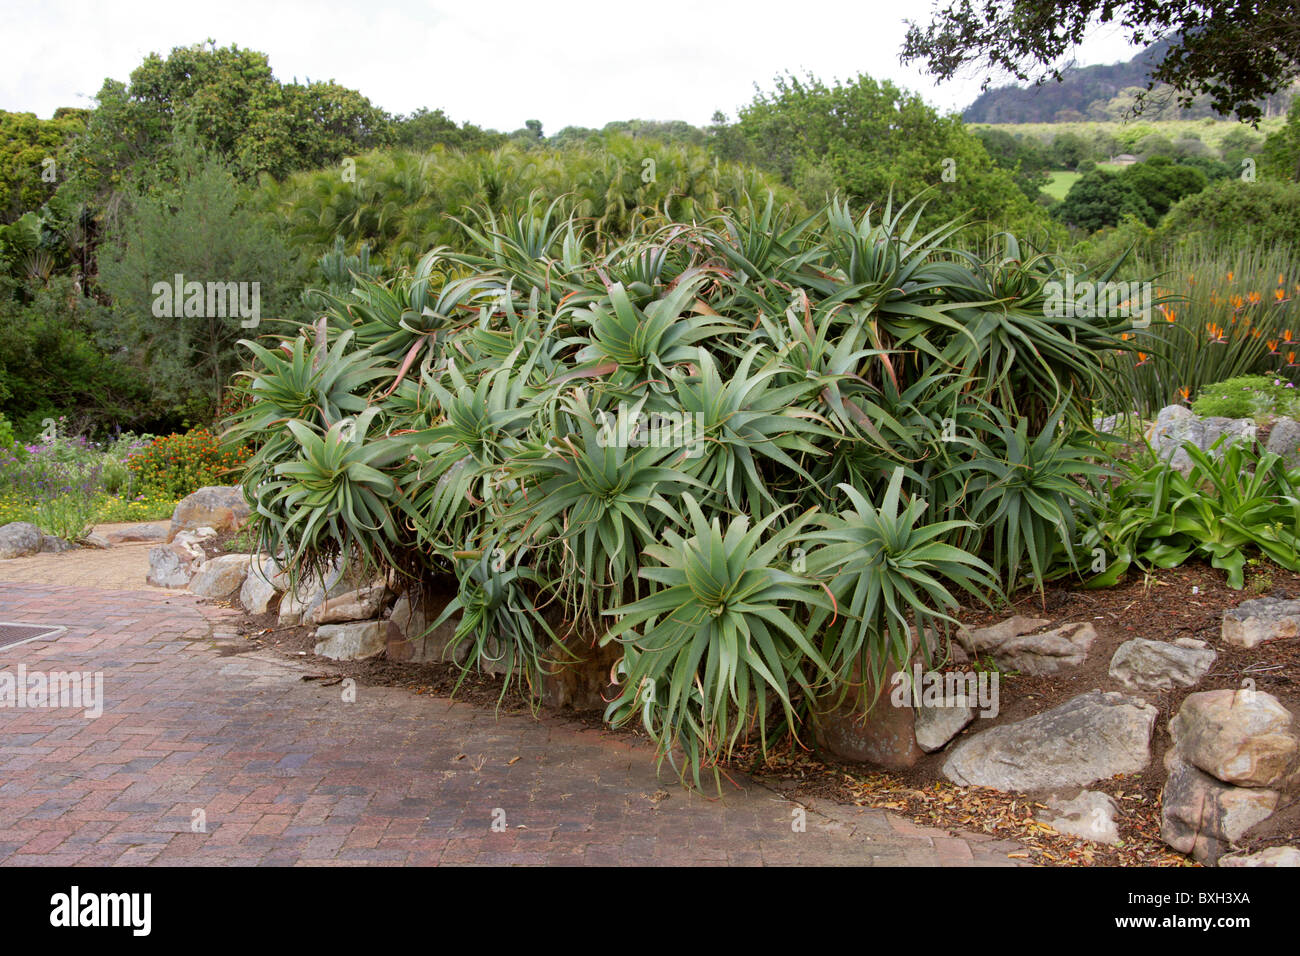 A Group of Aloe Plants at Kirstenbosch Botanical Gardens, Western Cape, South Africa. Stock Photo